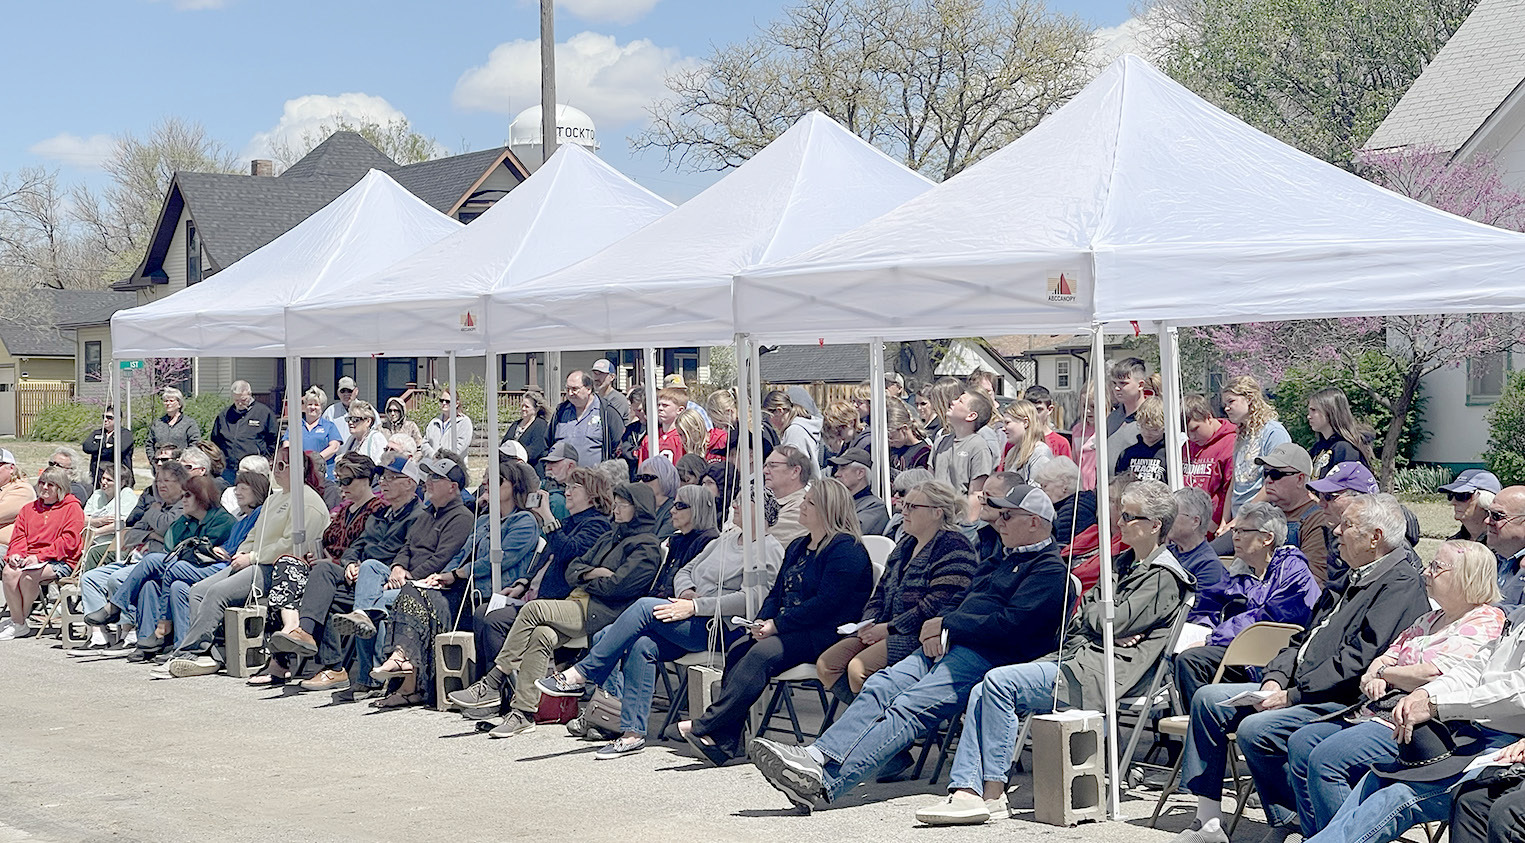 A LARGE CROWD of past courthouse officials, honored guests and community members were present for the program commemorating the 100th year of the Rooks County Courthouse. The event was held on Thursday, April 20th, exactly 100 years from the day of the Dedication.